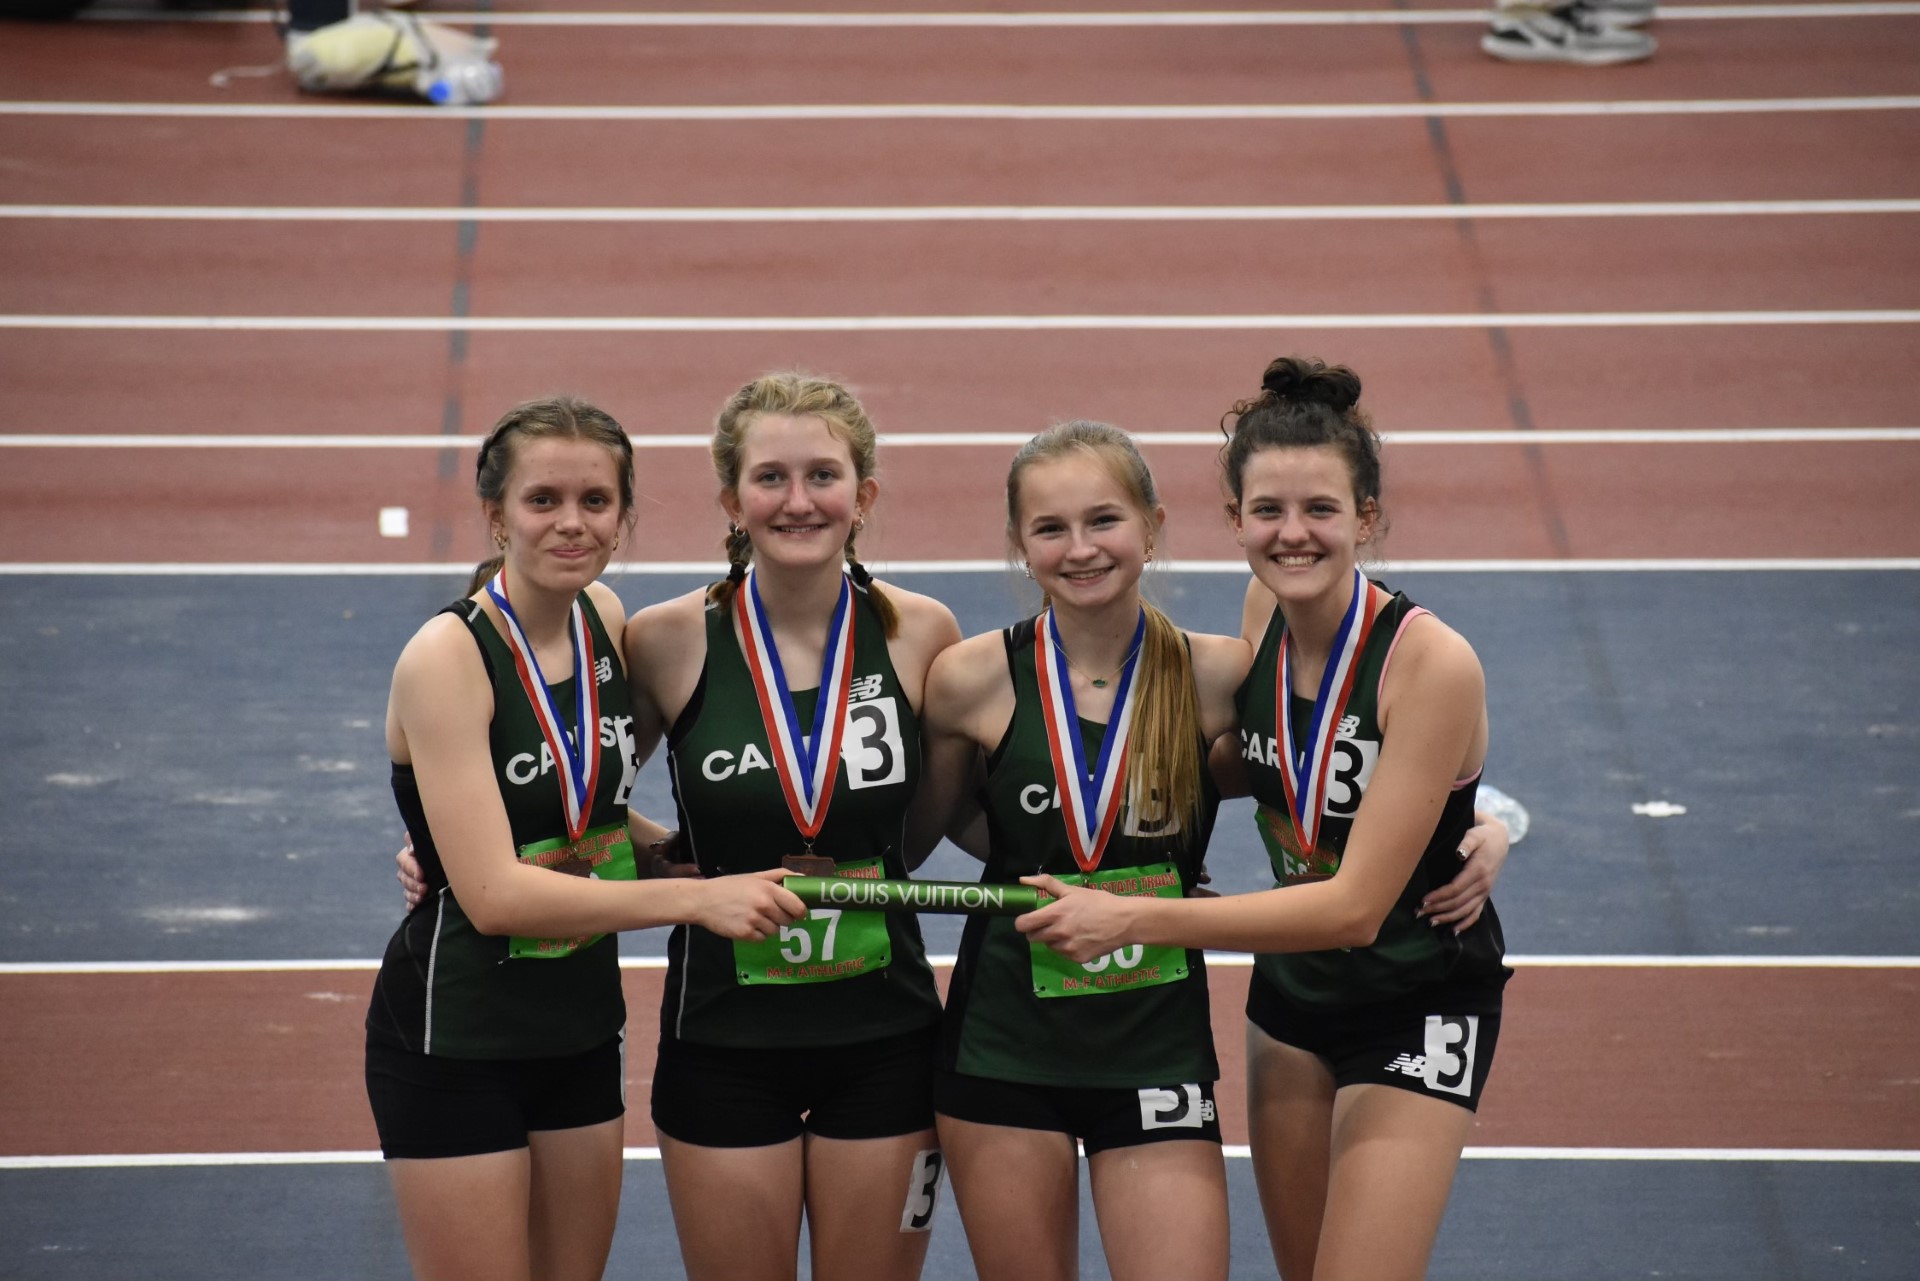 CHAMPIONS: (Left to right) Ana Bondy, Elisabeth Bordner, Savannah Oakes, and Emily Leatherman smile after placing 3rd at state championships.